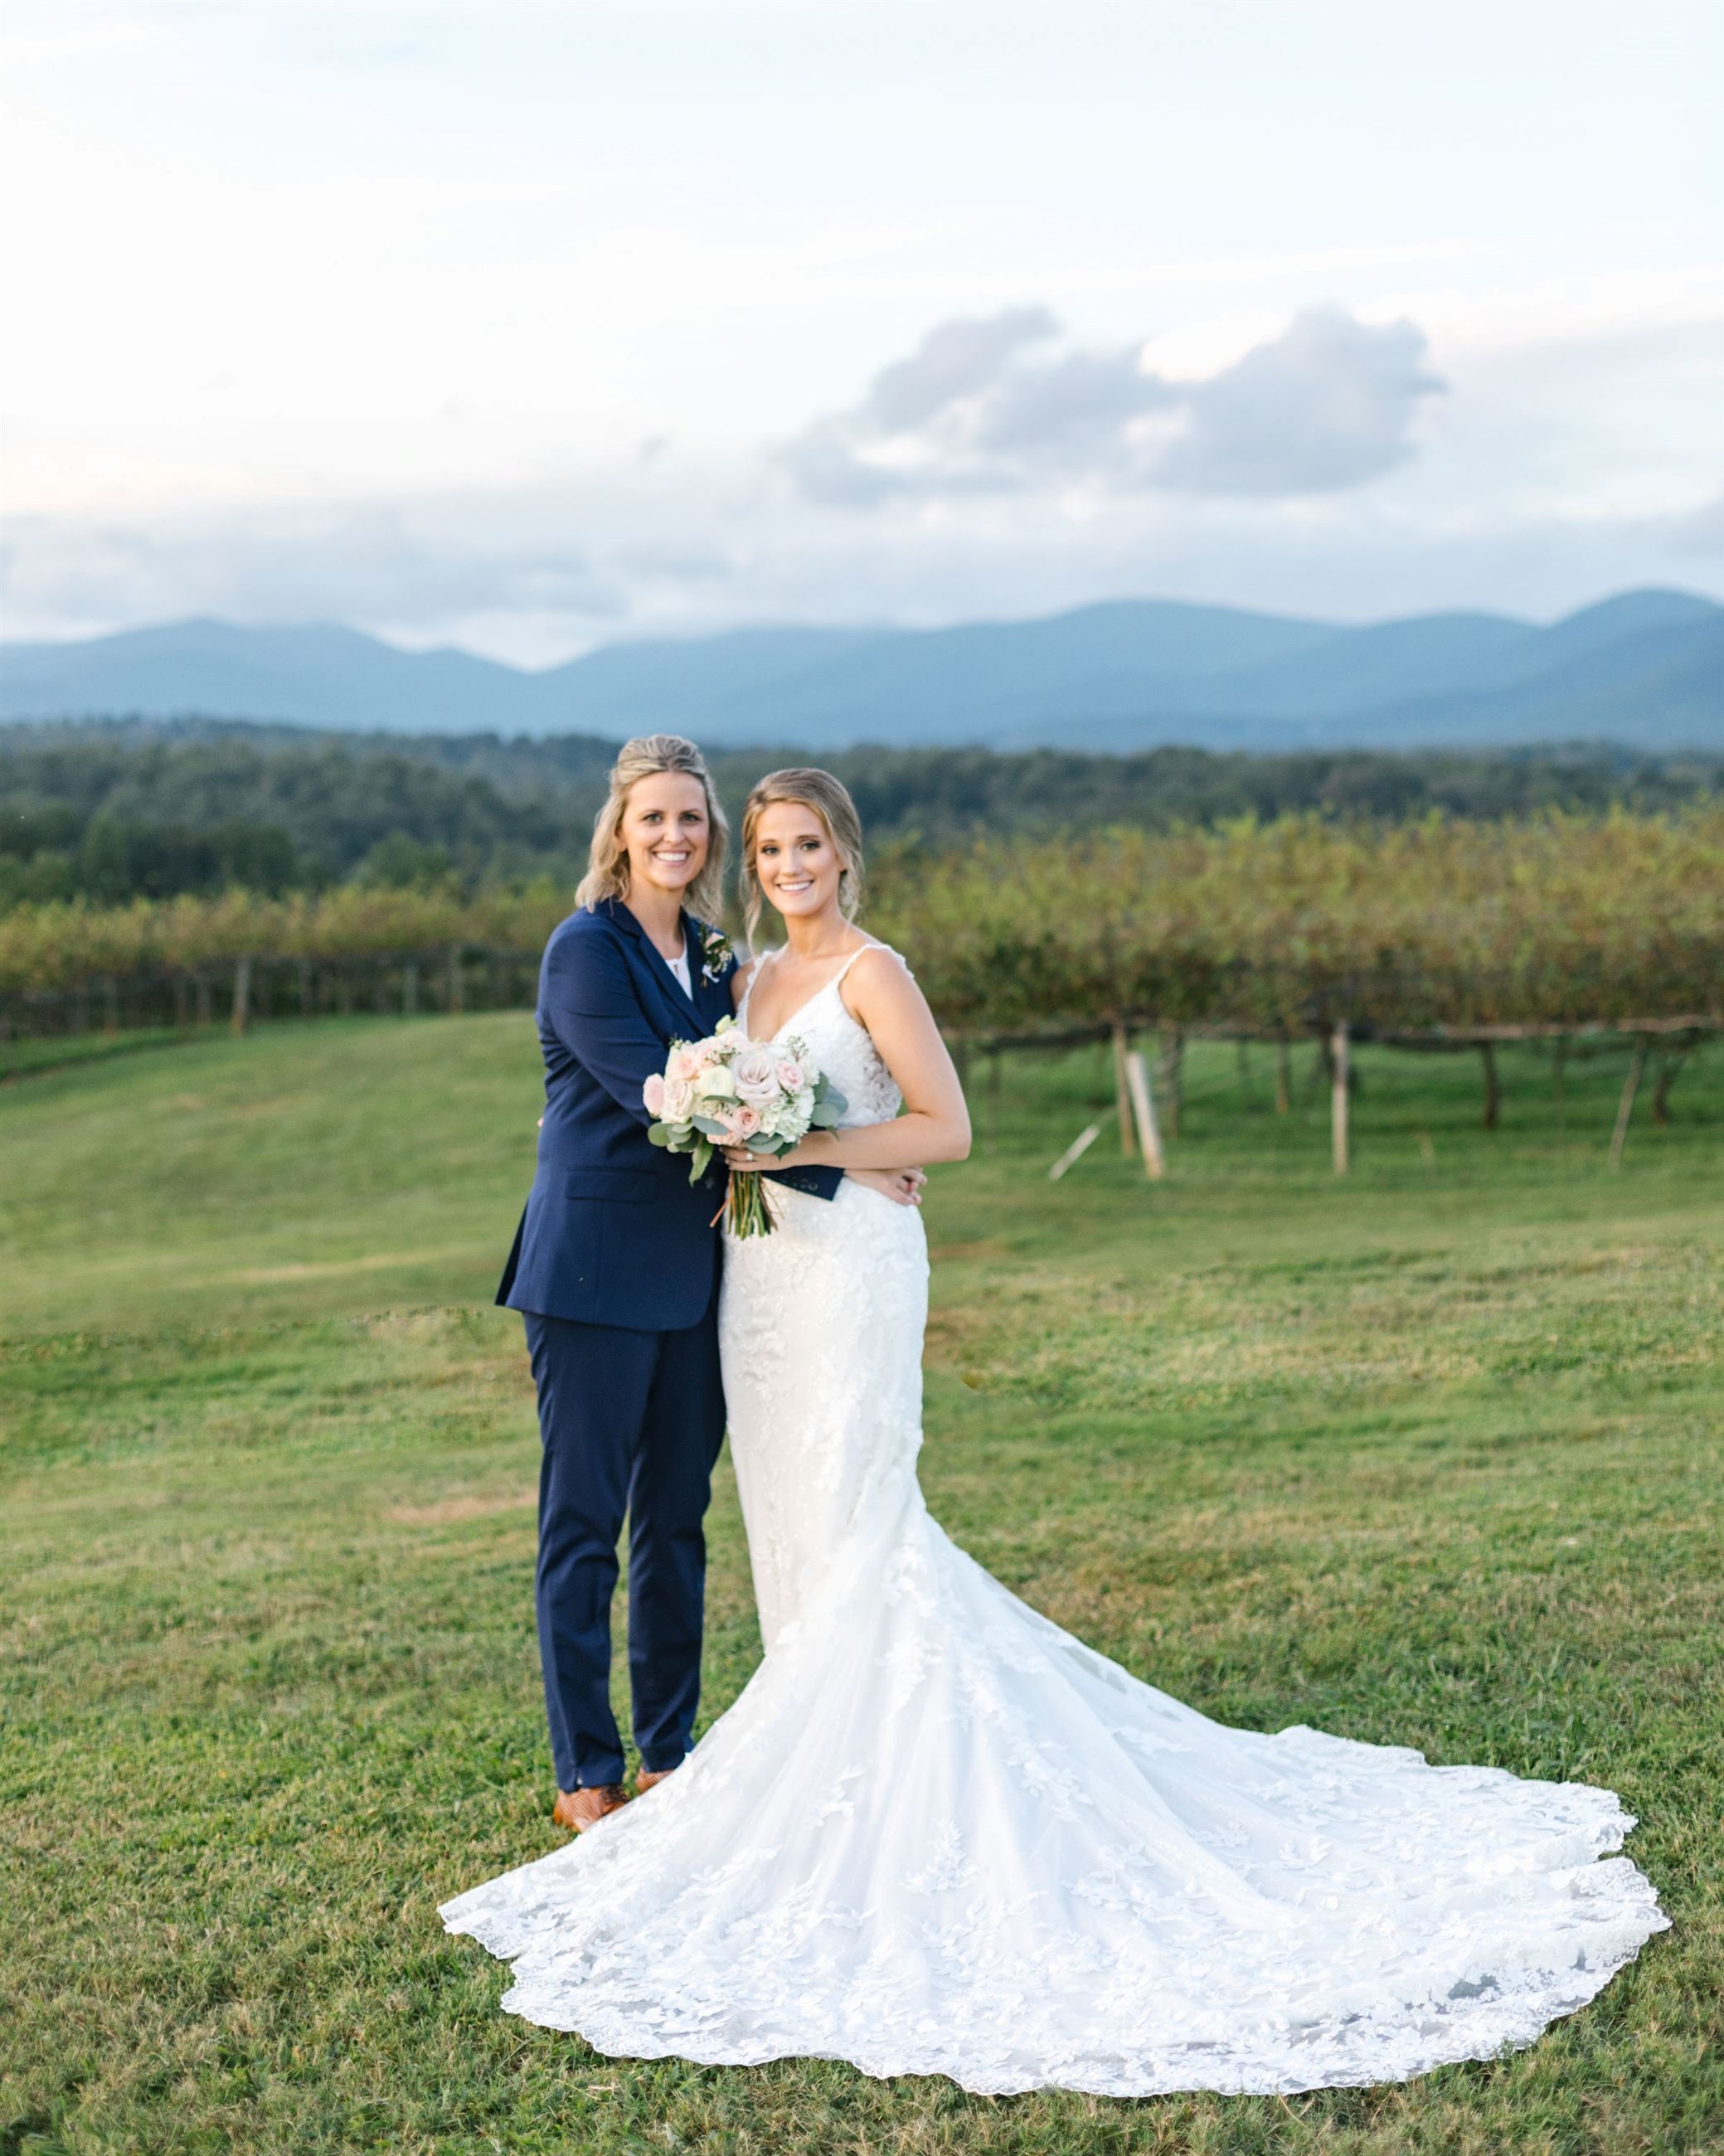 Two brides standing together in vineyard on wedding day